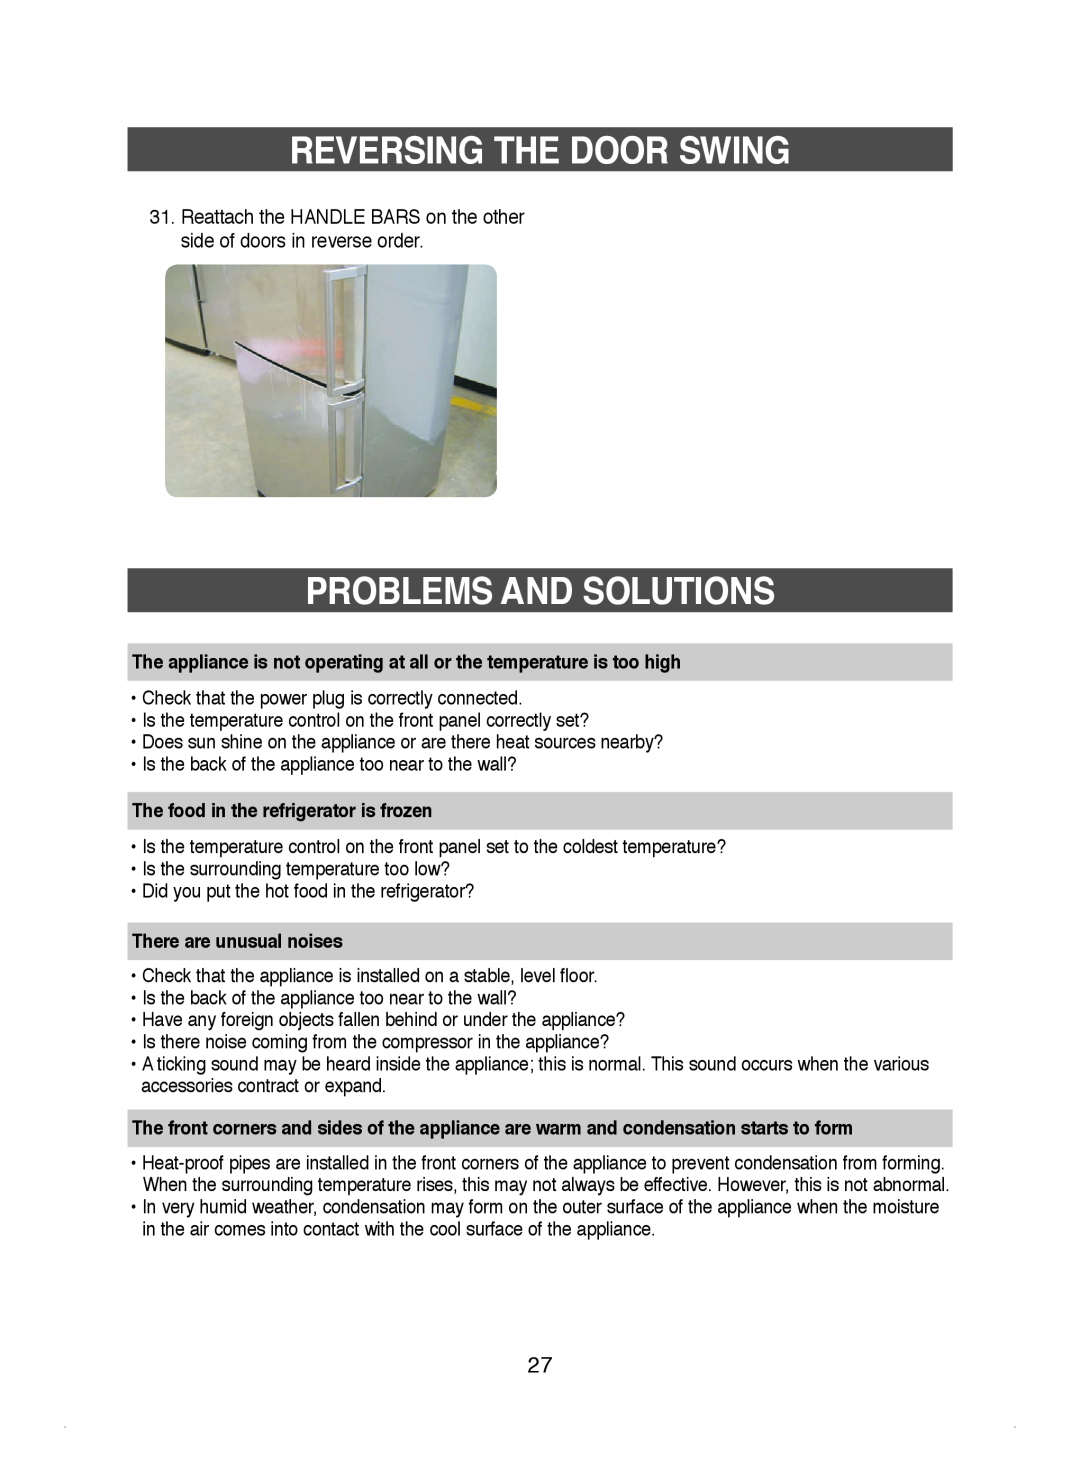 Samsung DA99-01220J manual Problems And Solutions, Reversing The Door Swing, The food in the refrigerator is frozen 